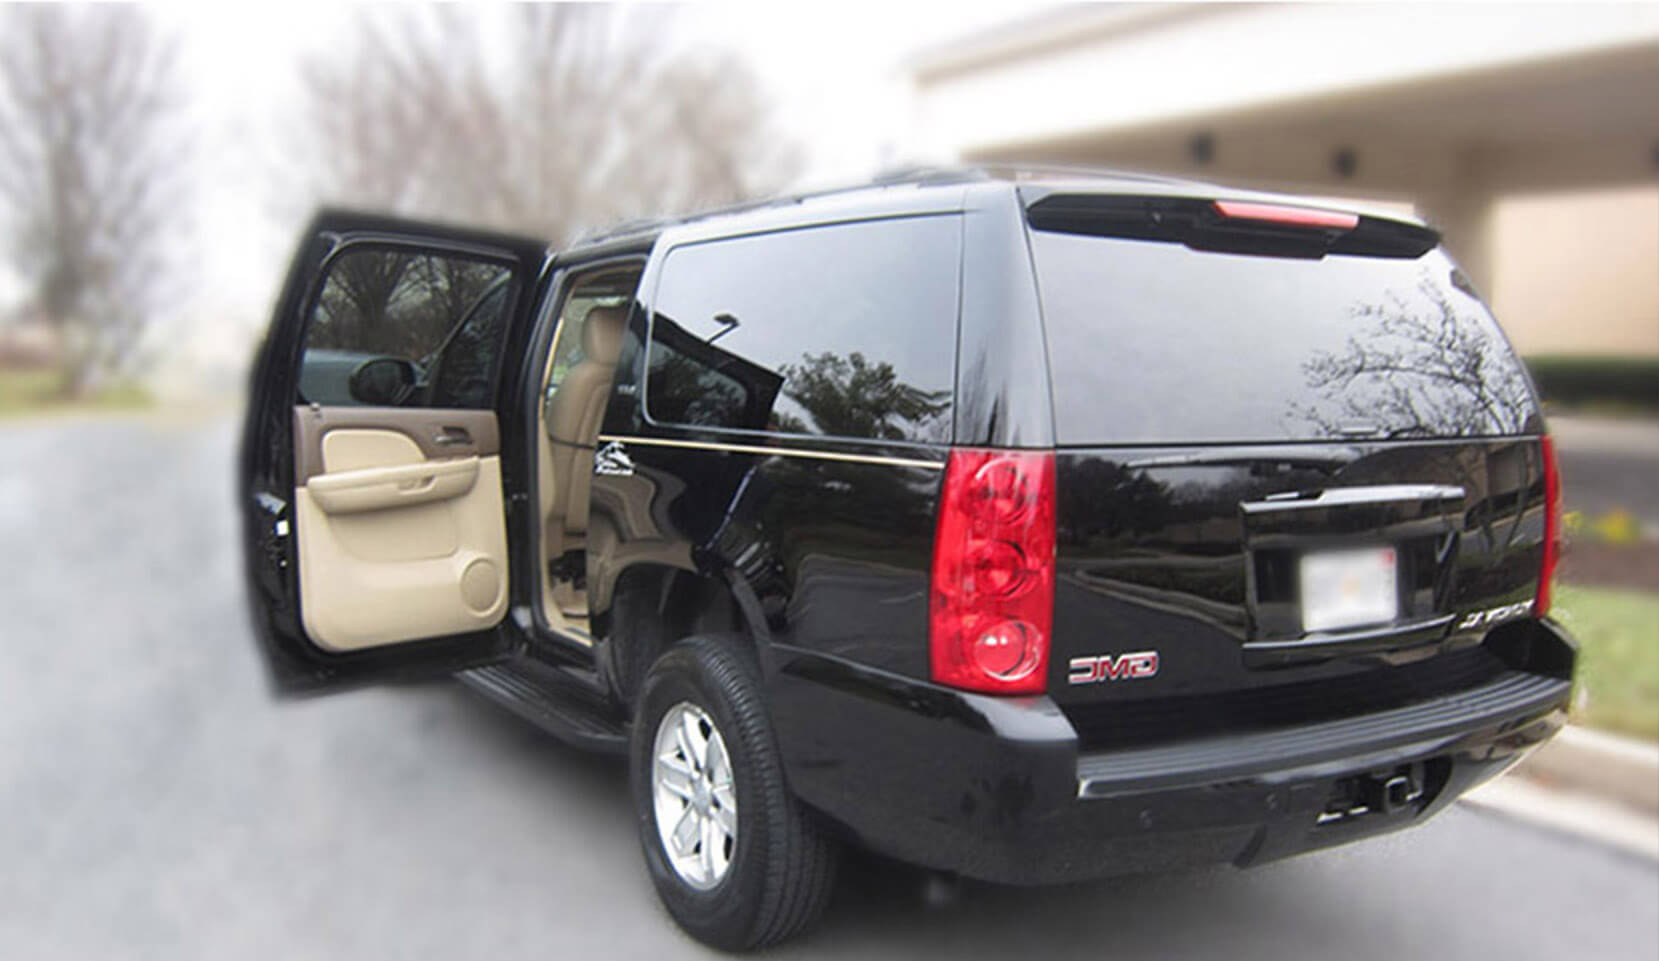 Luxurious black Yukon XL SUV provided by CLS Black Car Service in Annapolis, parked elegantly awaiting passengers